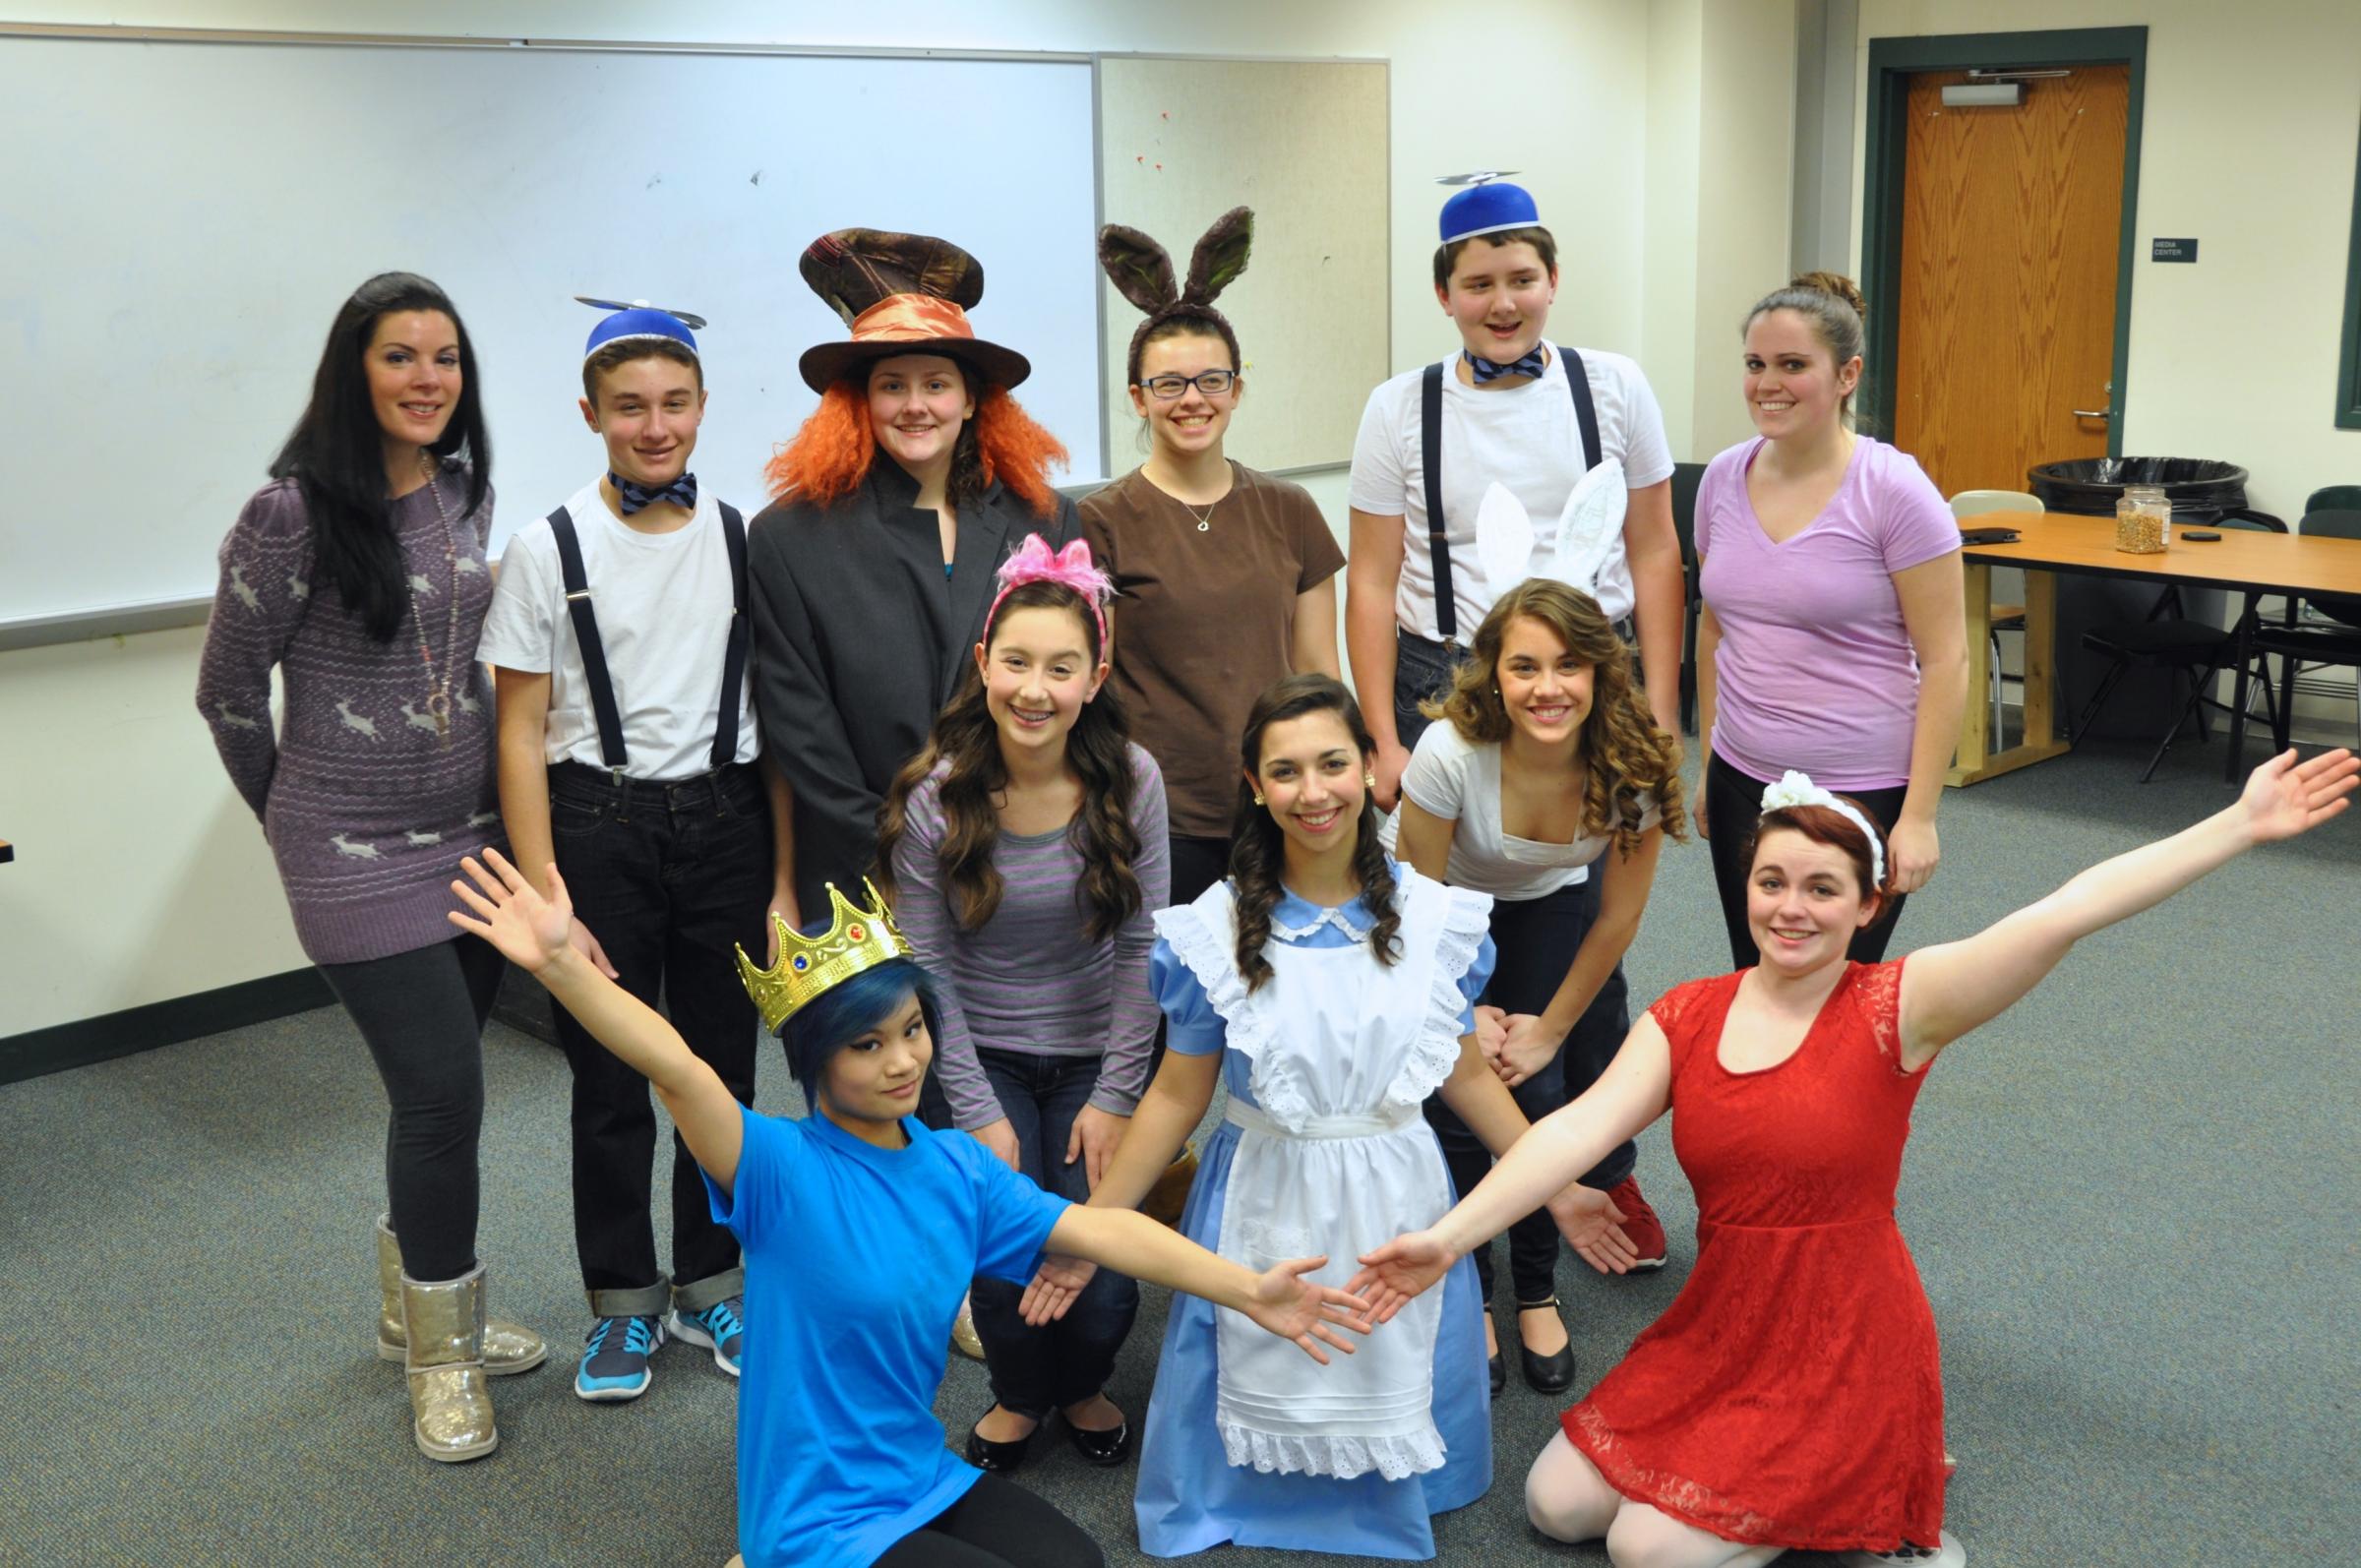 MA School Fundraises Their Way to National Performing Arts Festival